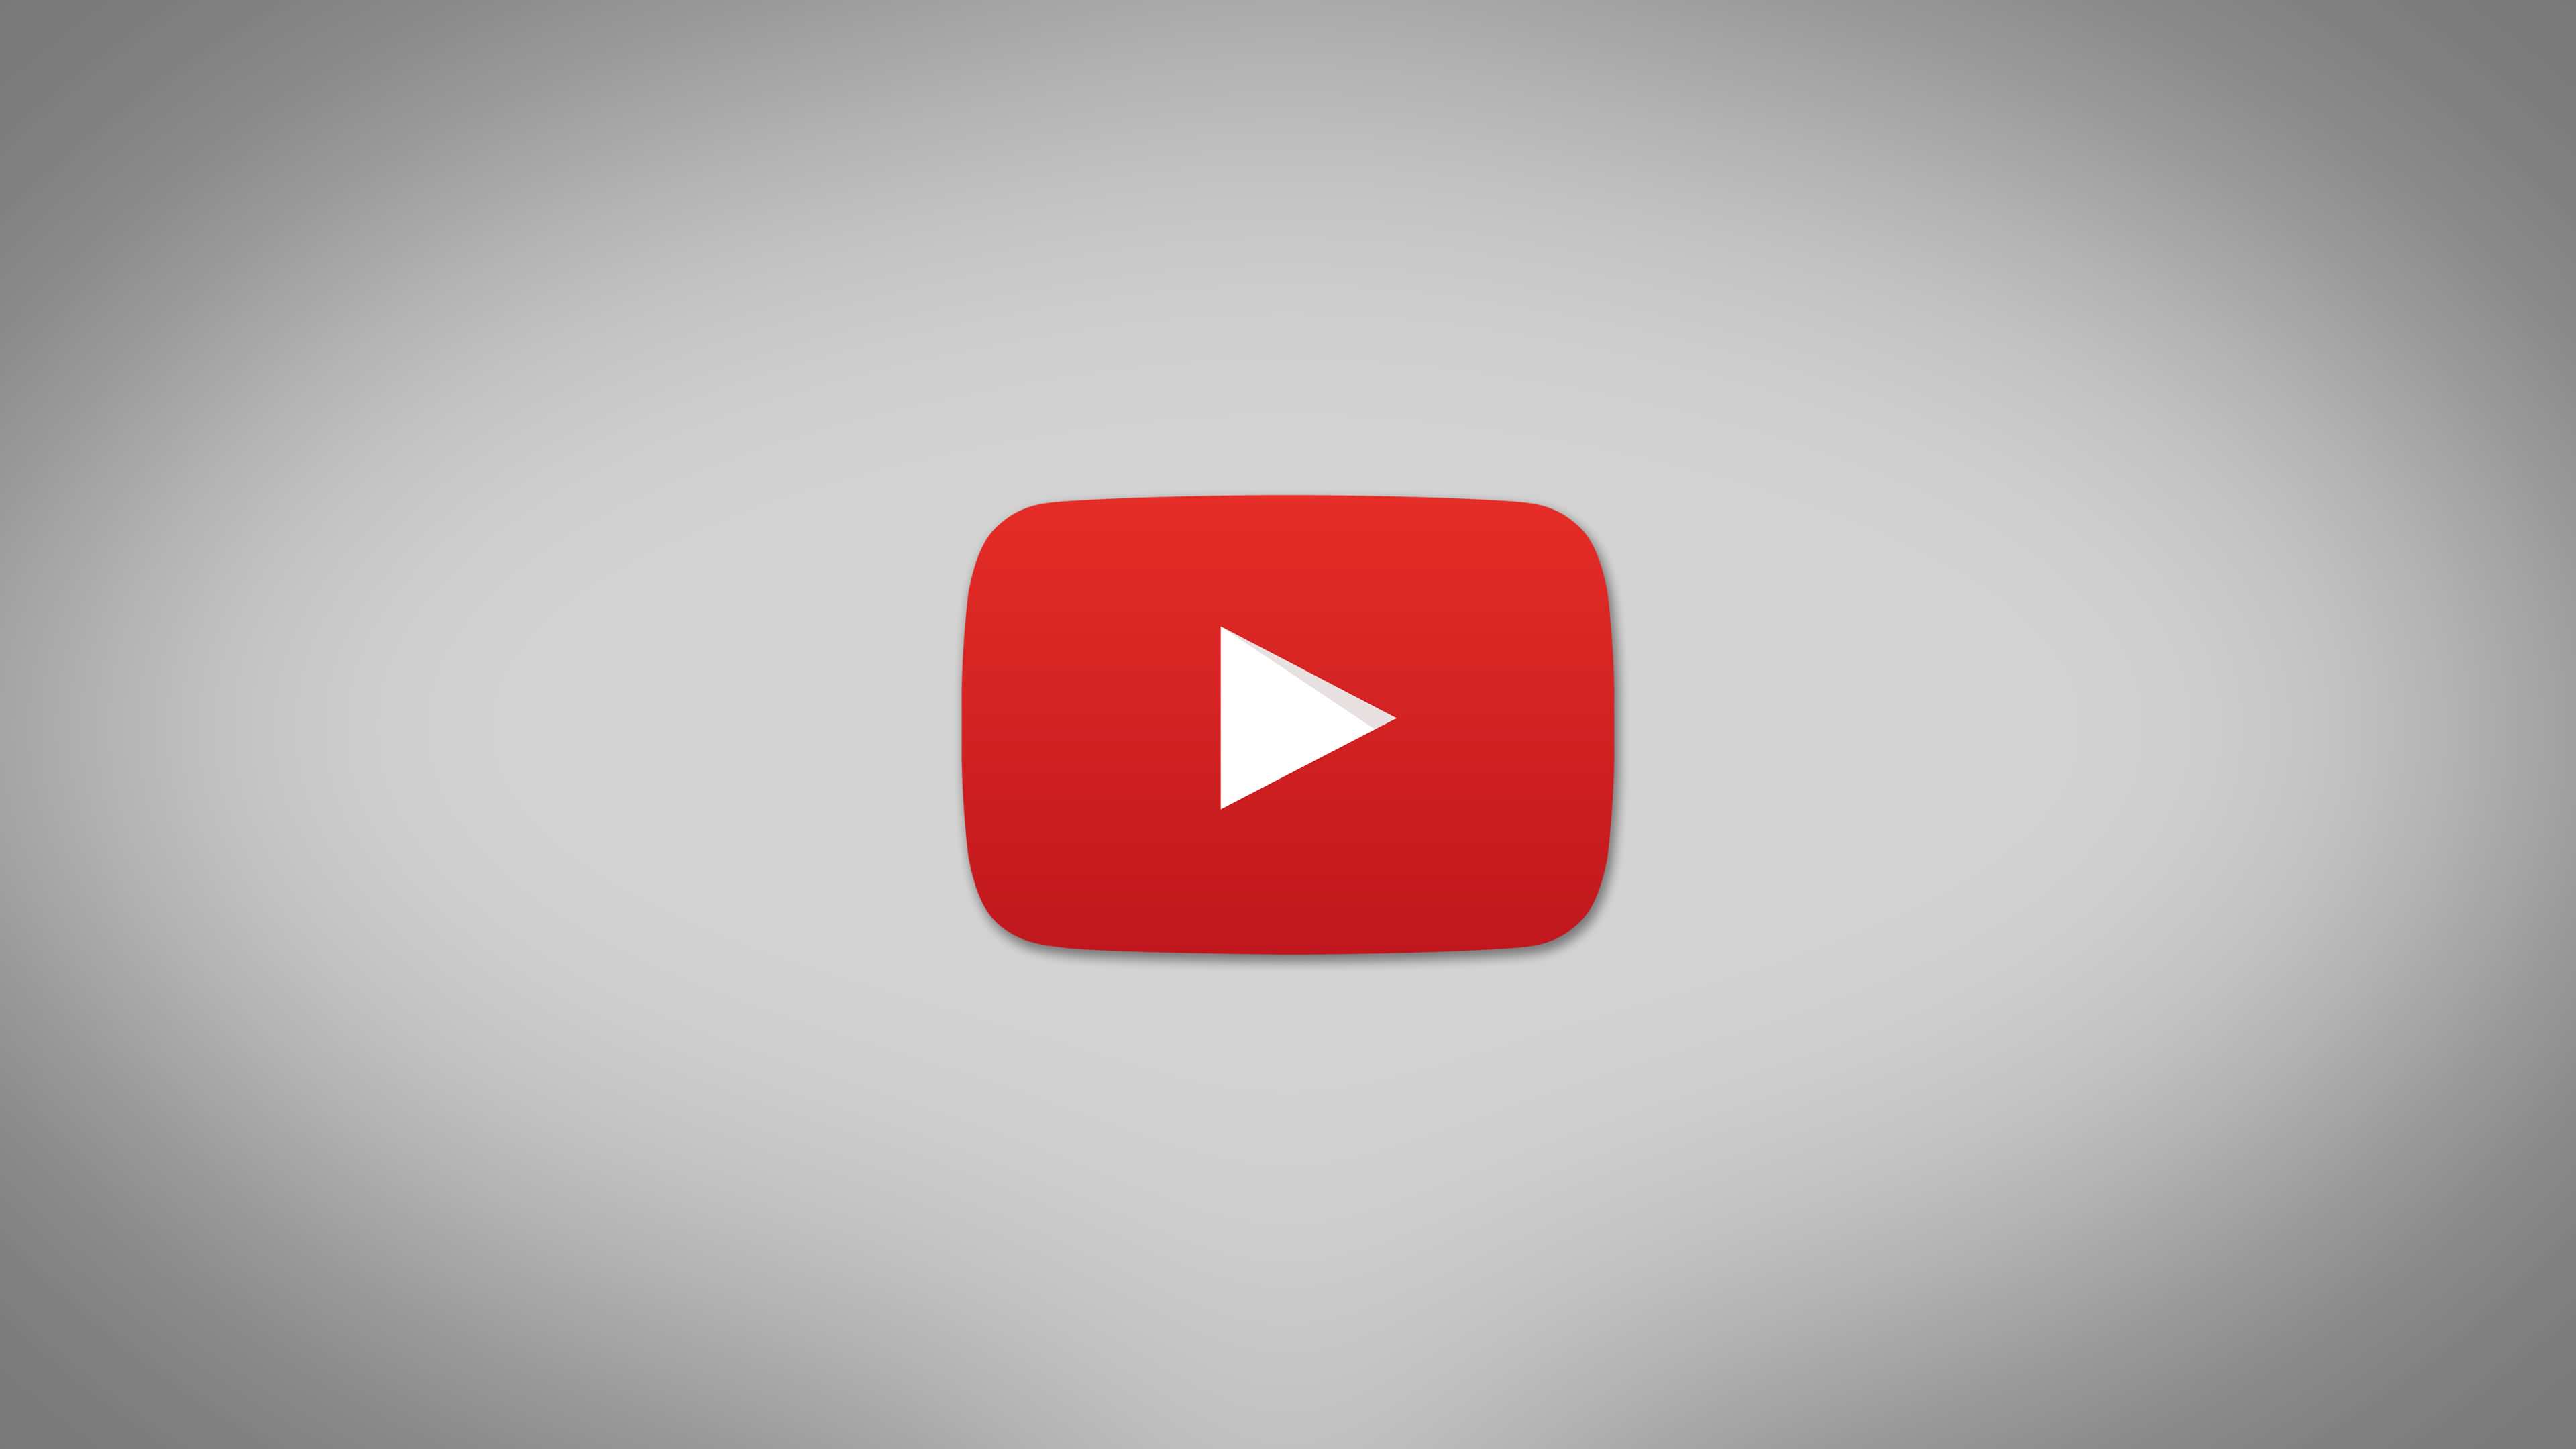 Youtube 4K wallpaper for your desktop or mobile screen free and easy to download